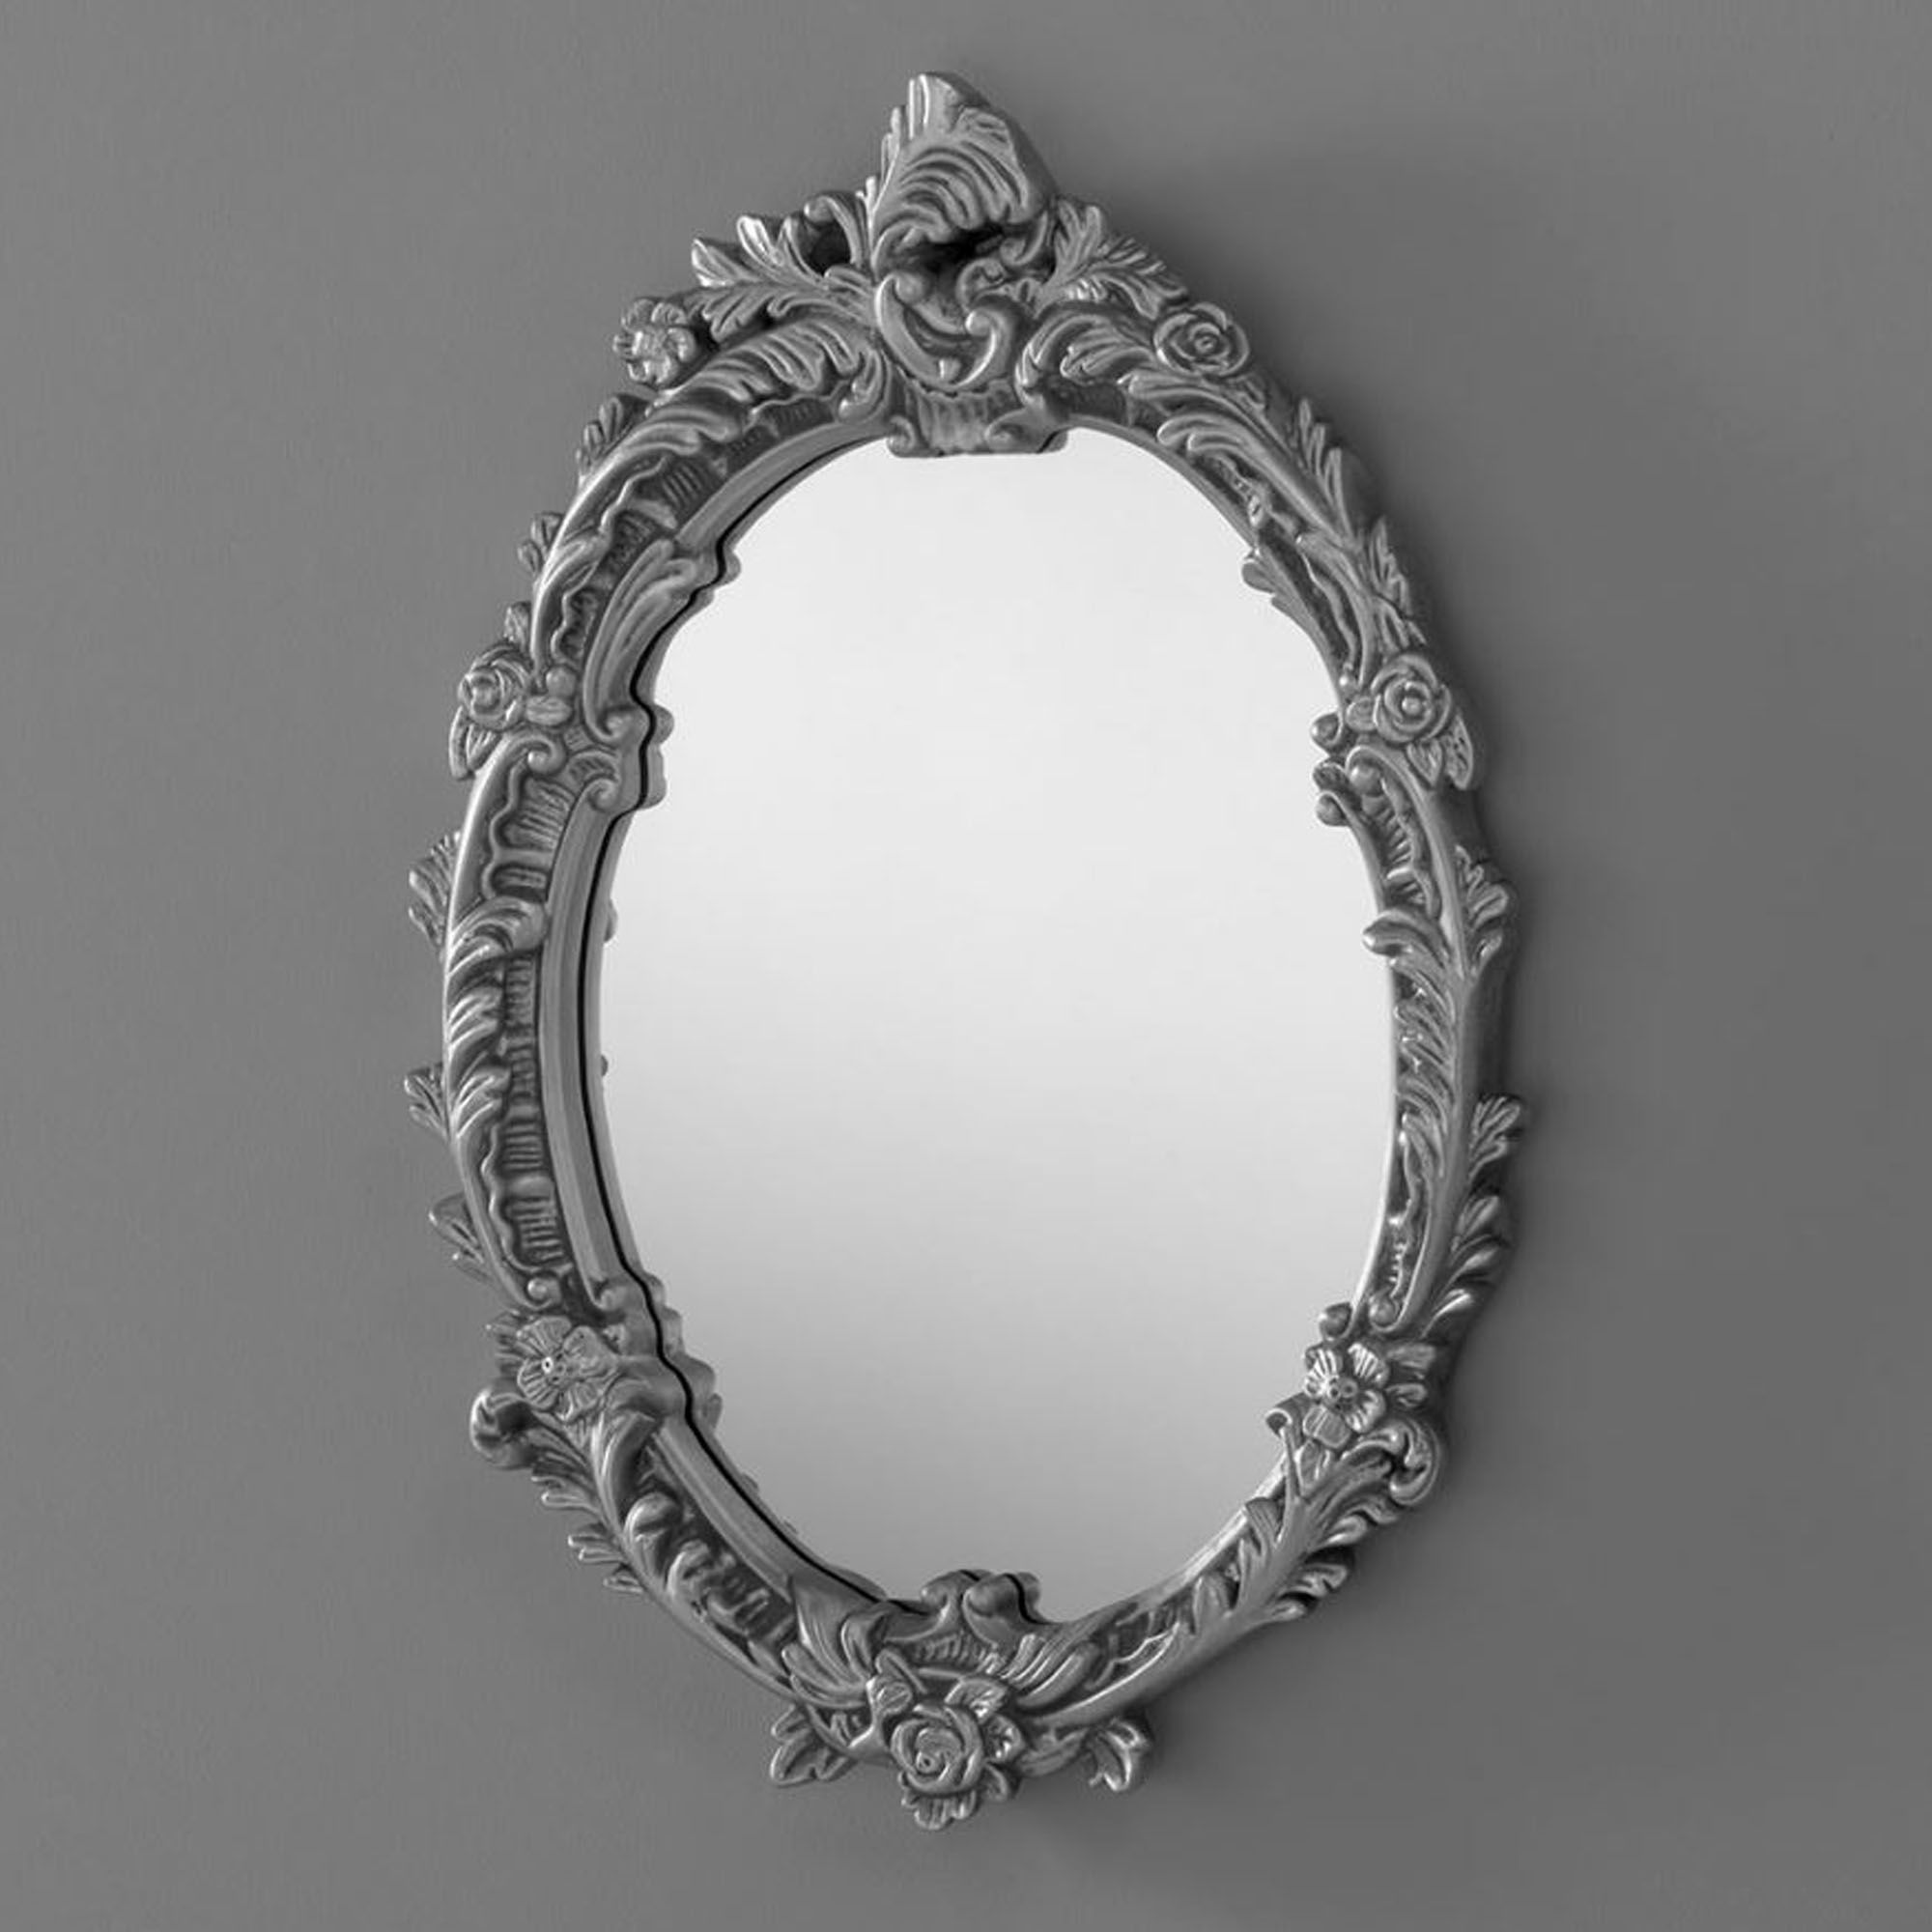 Antique French Style Oval Ornate Wall Mirror | Homesdirect365 Inside Antiqued Glass Wall Mirrors (View 6 of 15)